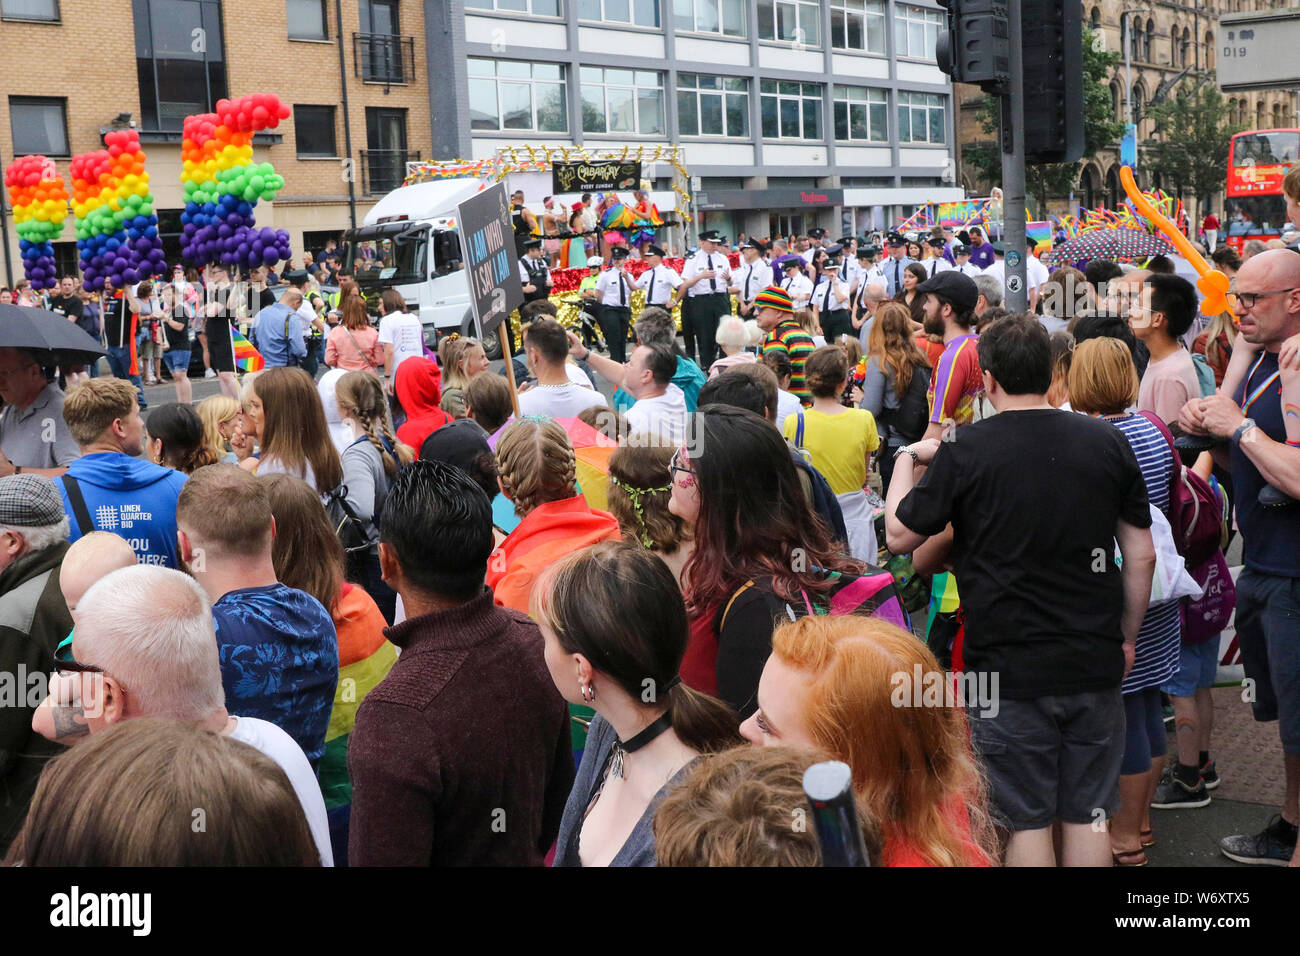 Belfast, Northern Ireland, UK. 03rd August 2019. The culmination of this year's Belfast Pride Festival was today's Belfast Pride Parade. The Belfast Pride Parade is now one of the largest parades in the city and the main event in LGBTQ+ calendar. Credit: CAZIMB/Alamy Live News. Stock Photo